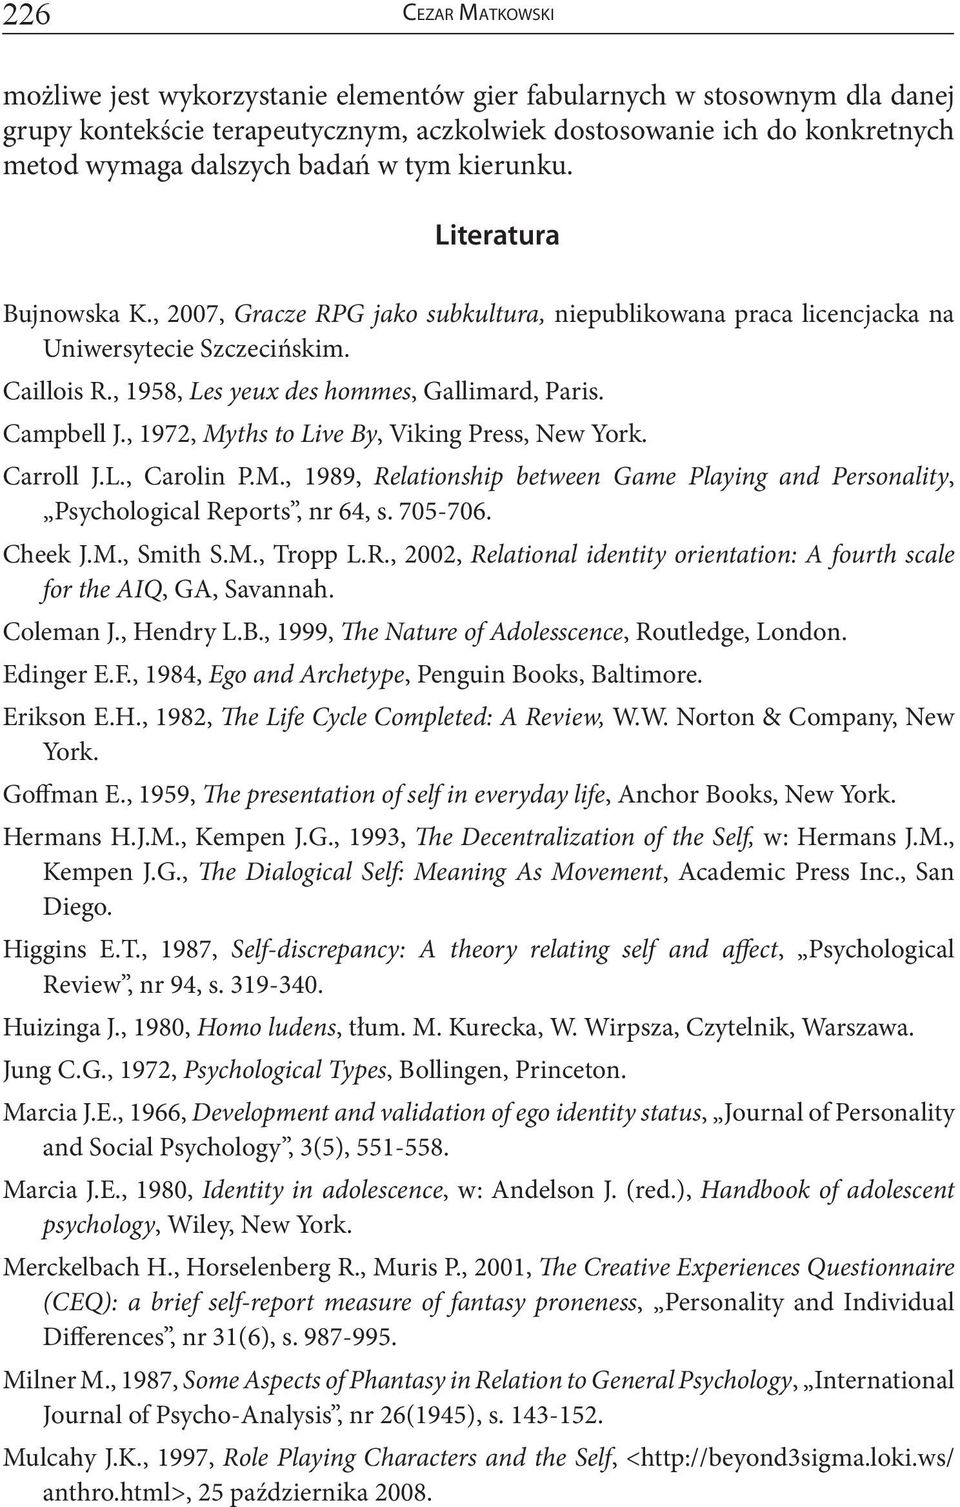 , 1972, Myths to Live By, Viking Pess, New Yok. Caoll J.L., Caolin P.M., 1989, Relationship between Game Playing and Pesonality, Psychological Repots, n 64, s. 705-706. Cheek J.M., Smith S.M., Topp L.